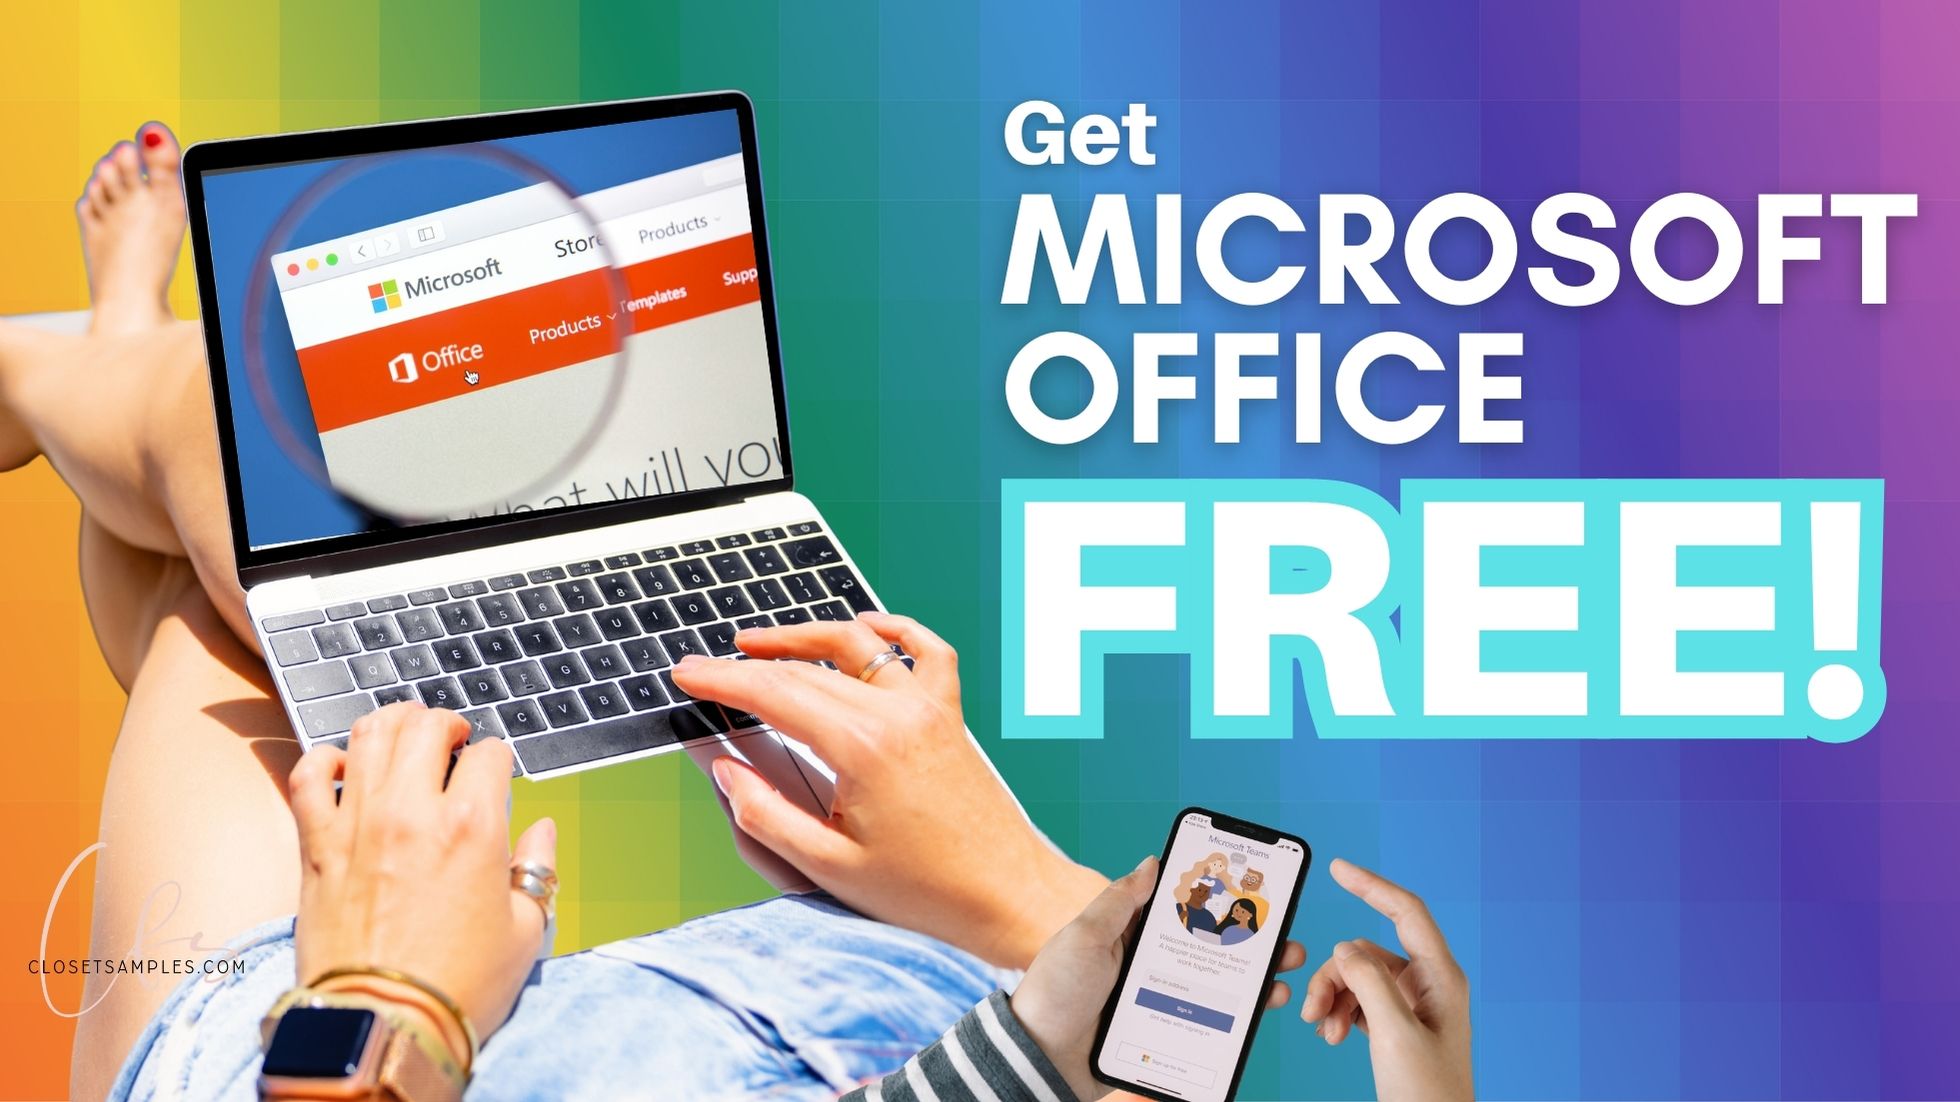 Get Microsoft Office For FREE closetsamples